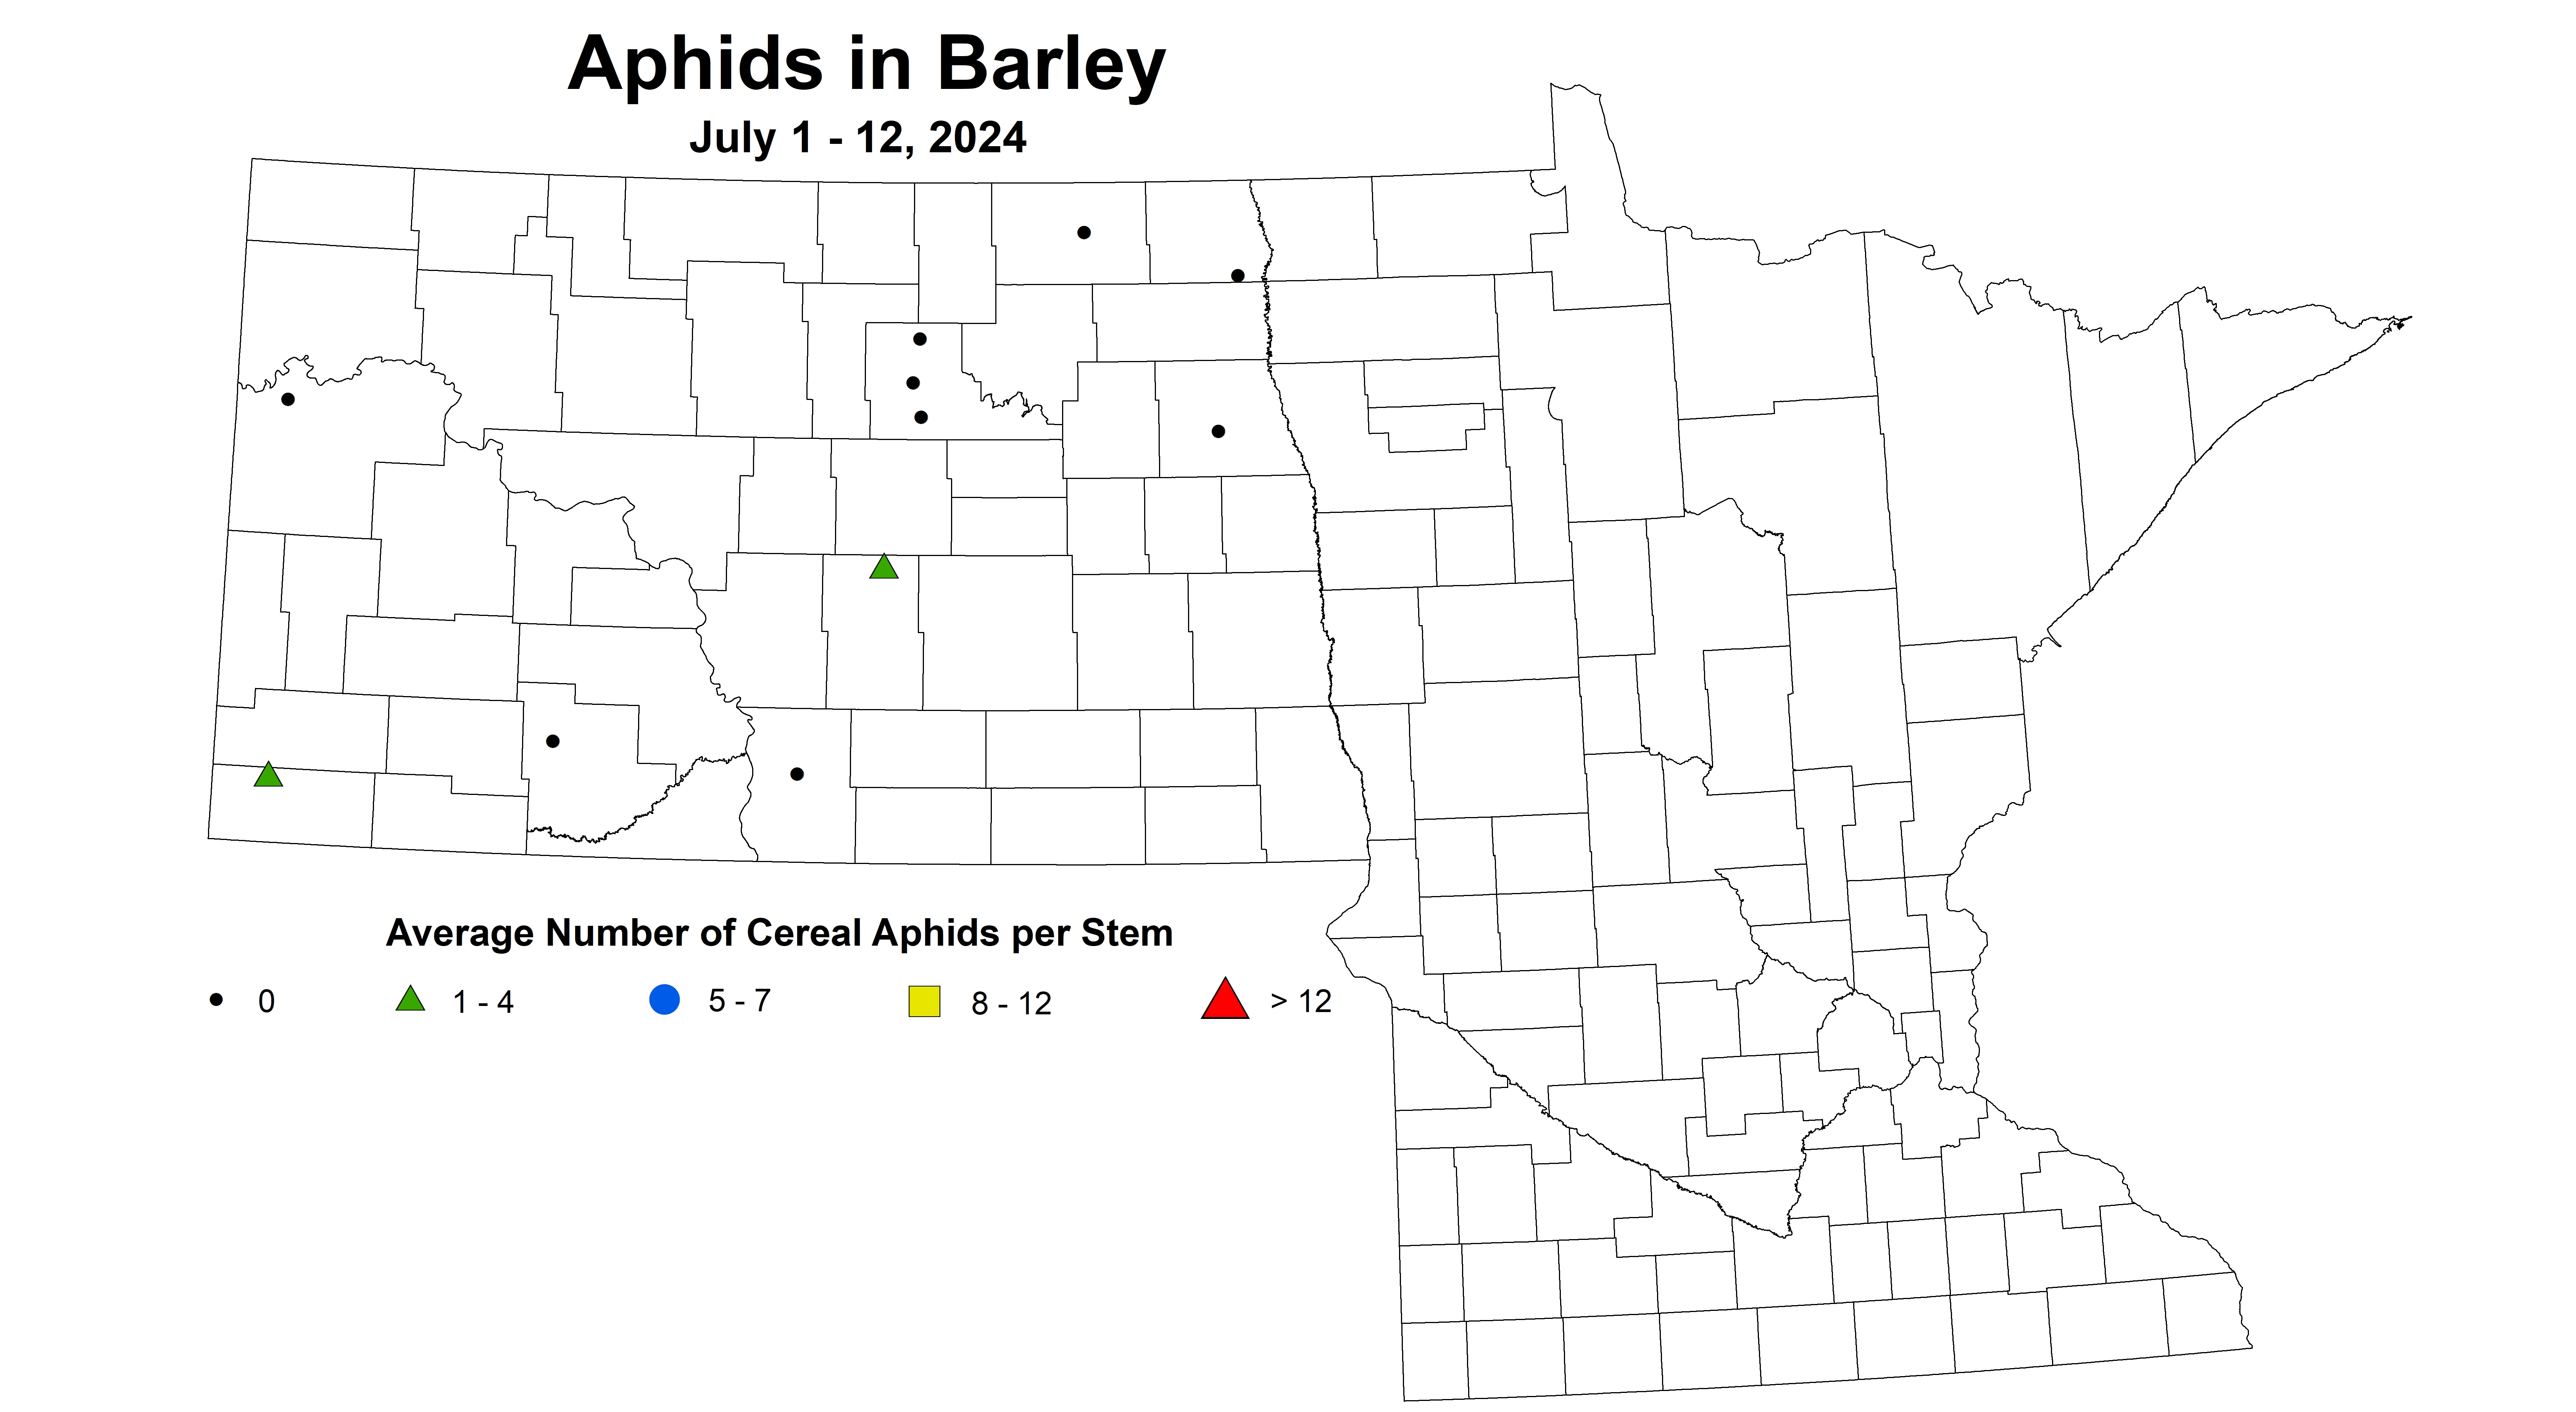 barley aphids July 1-12 2024